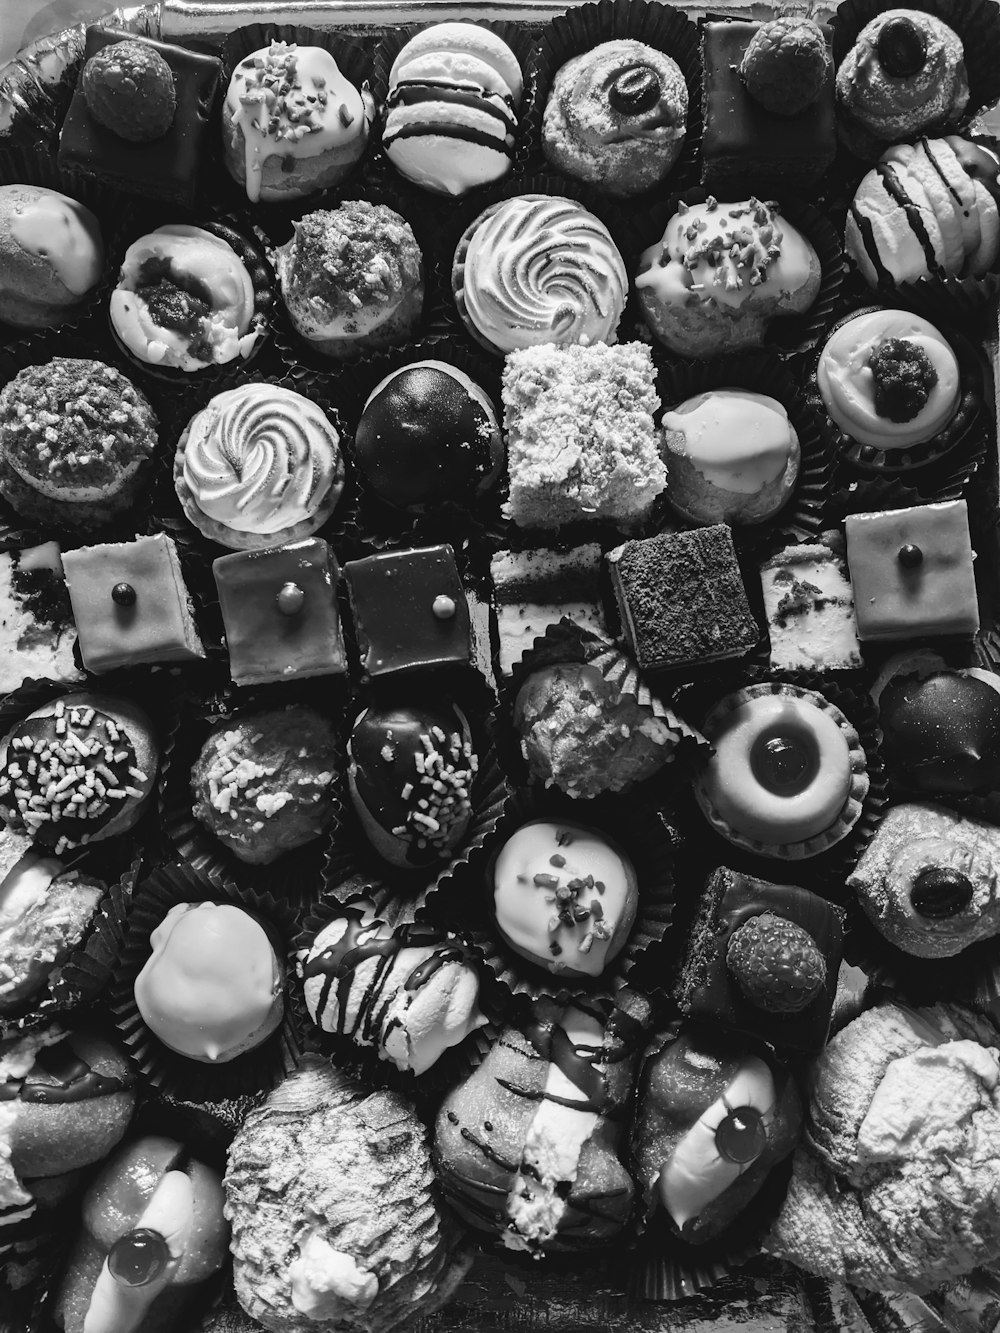 a box filled with lots of different types of donuts